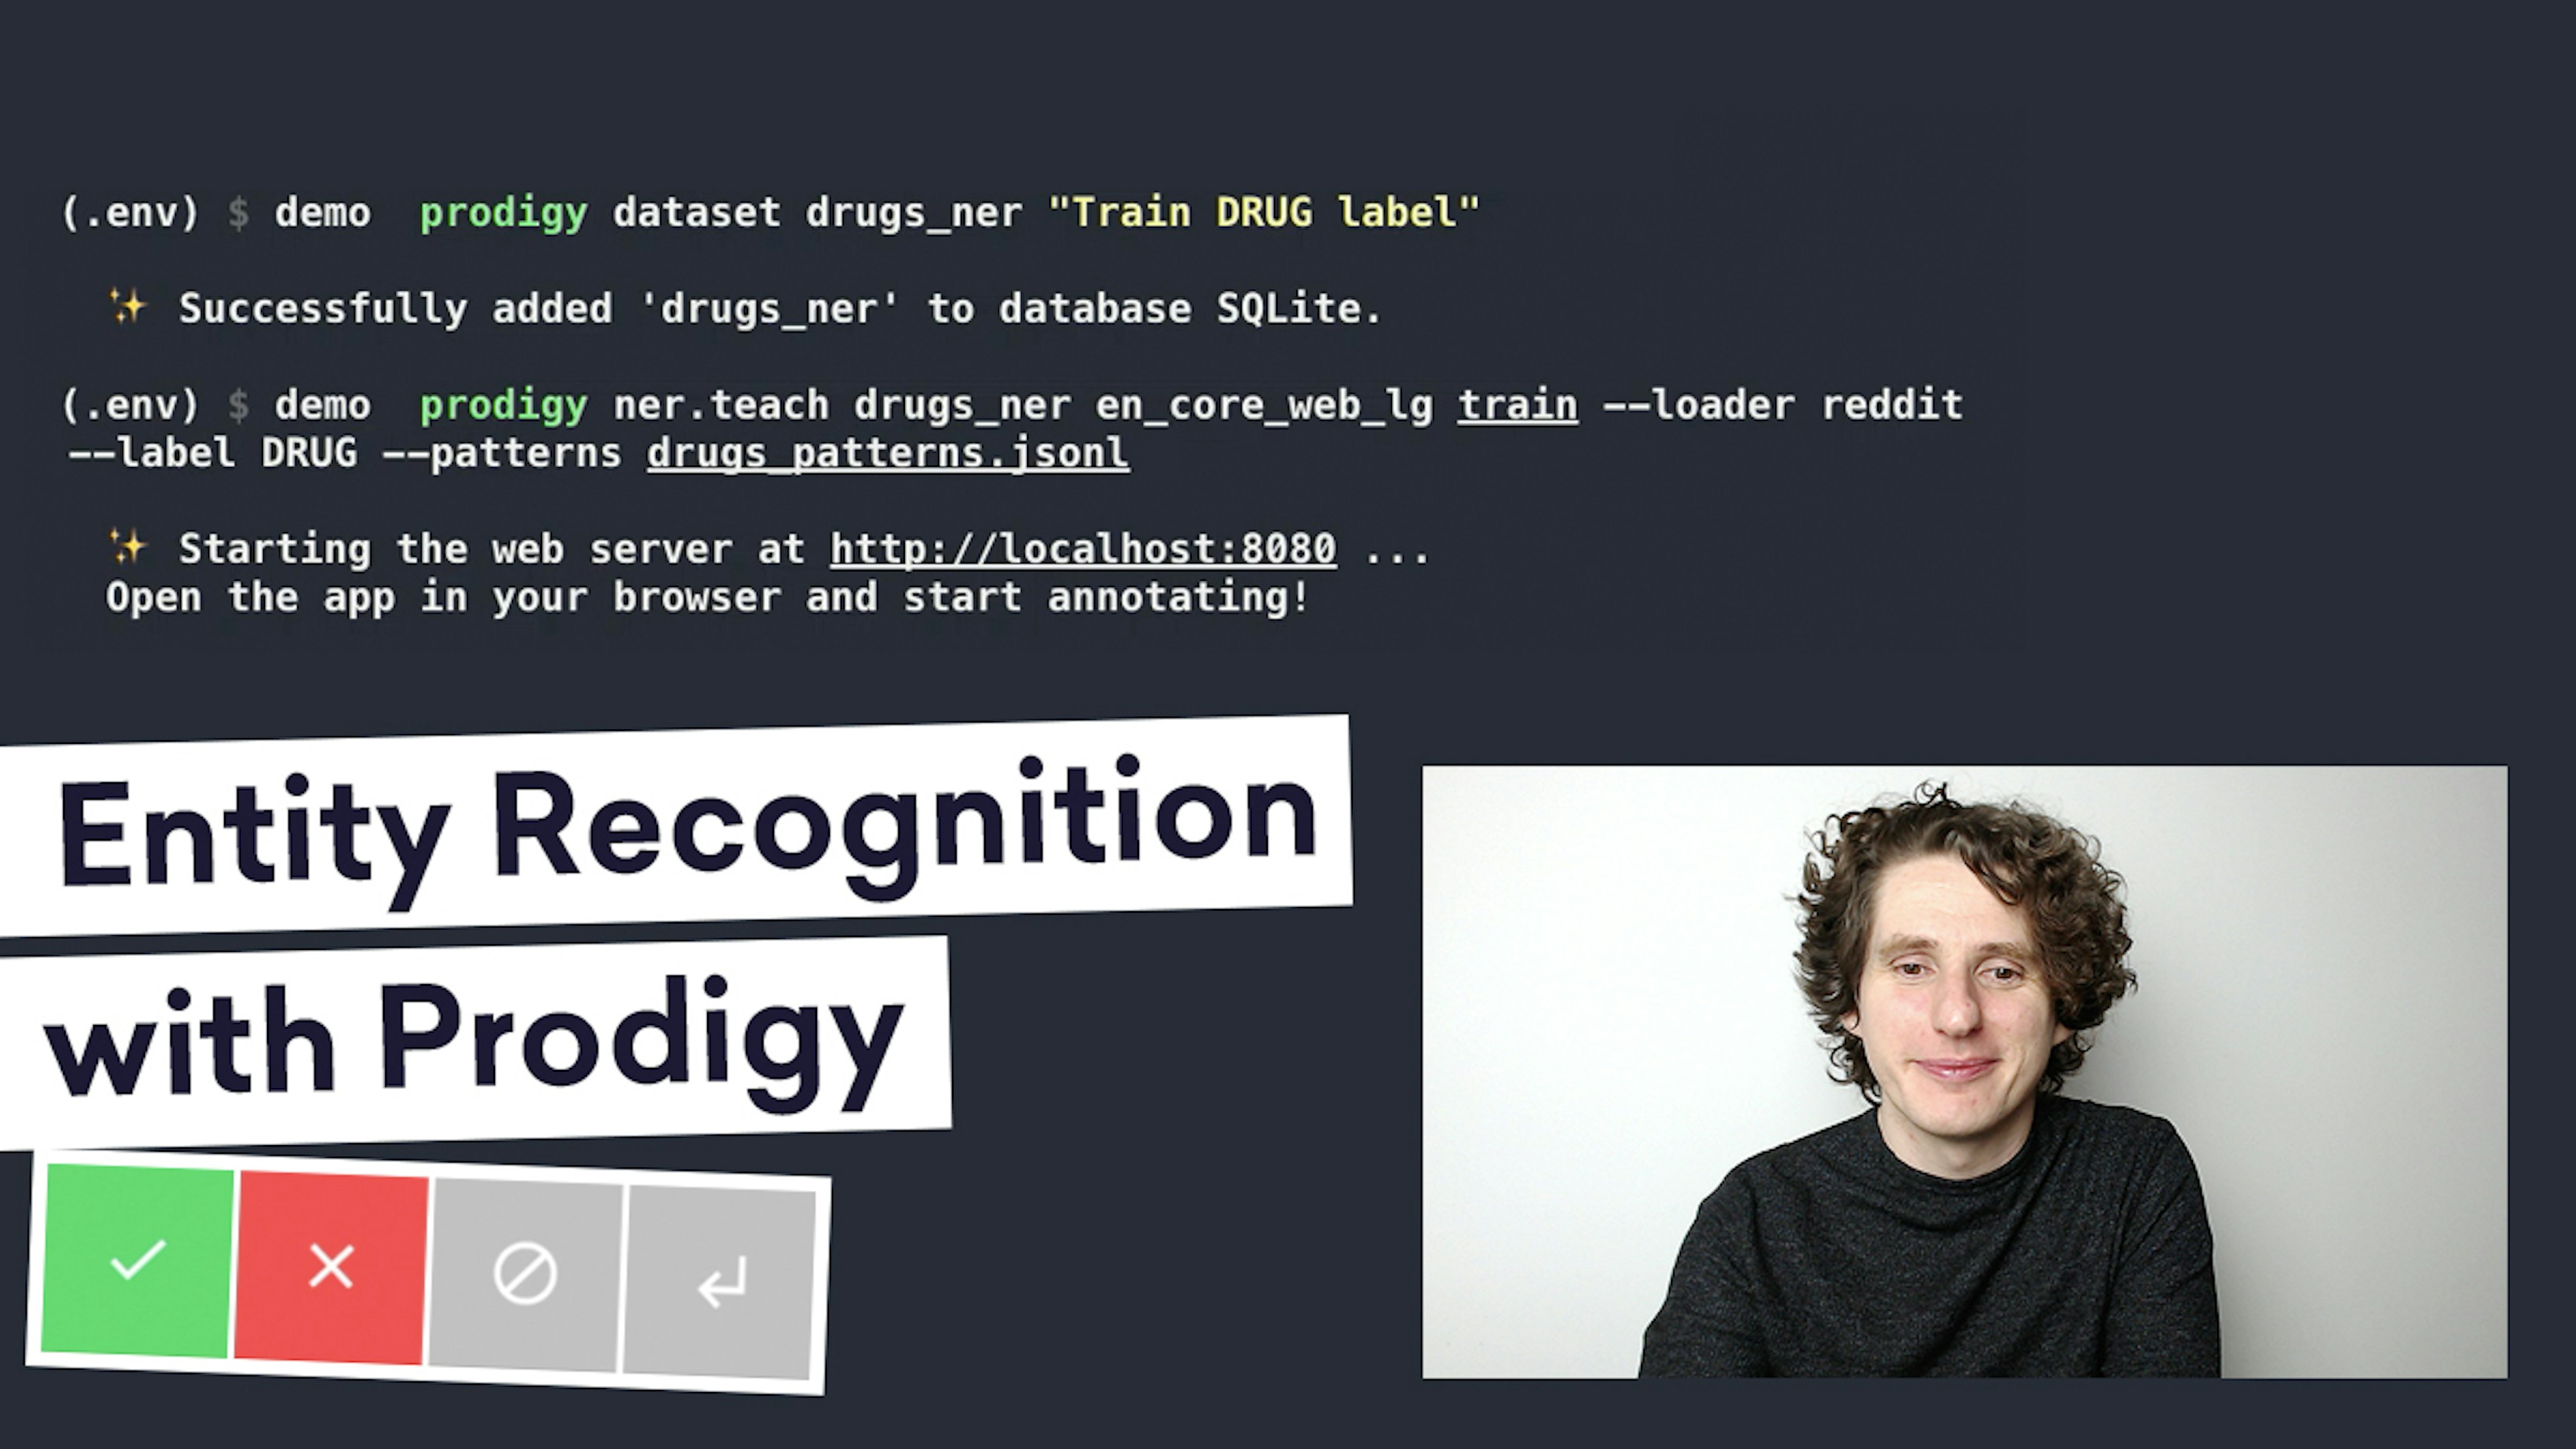 Training a new entity type with Prodigy – annotation powered by active learning